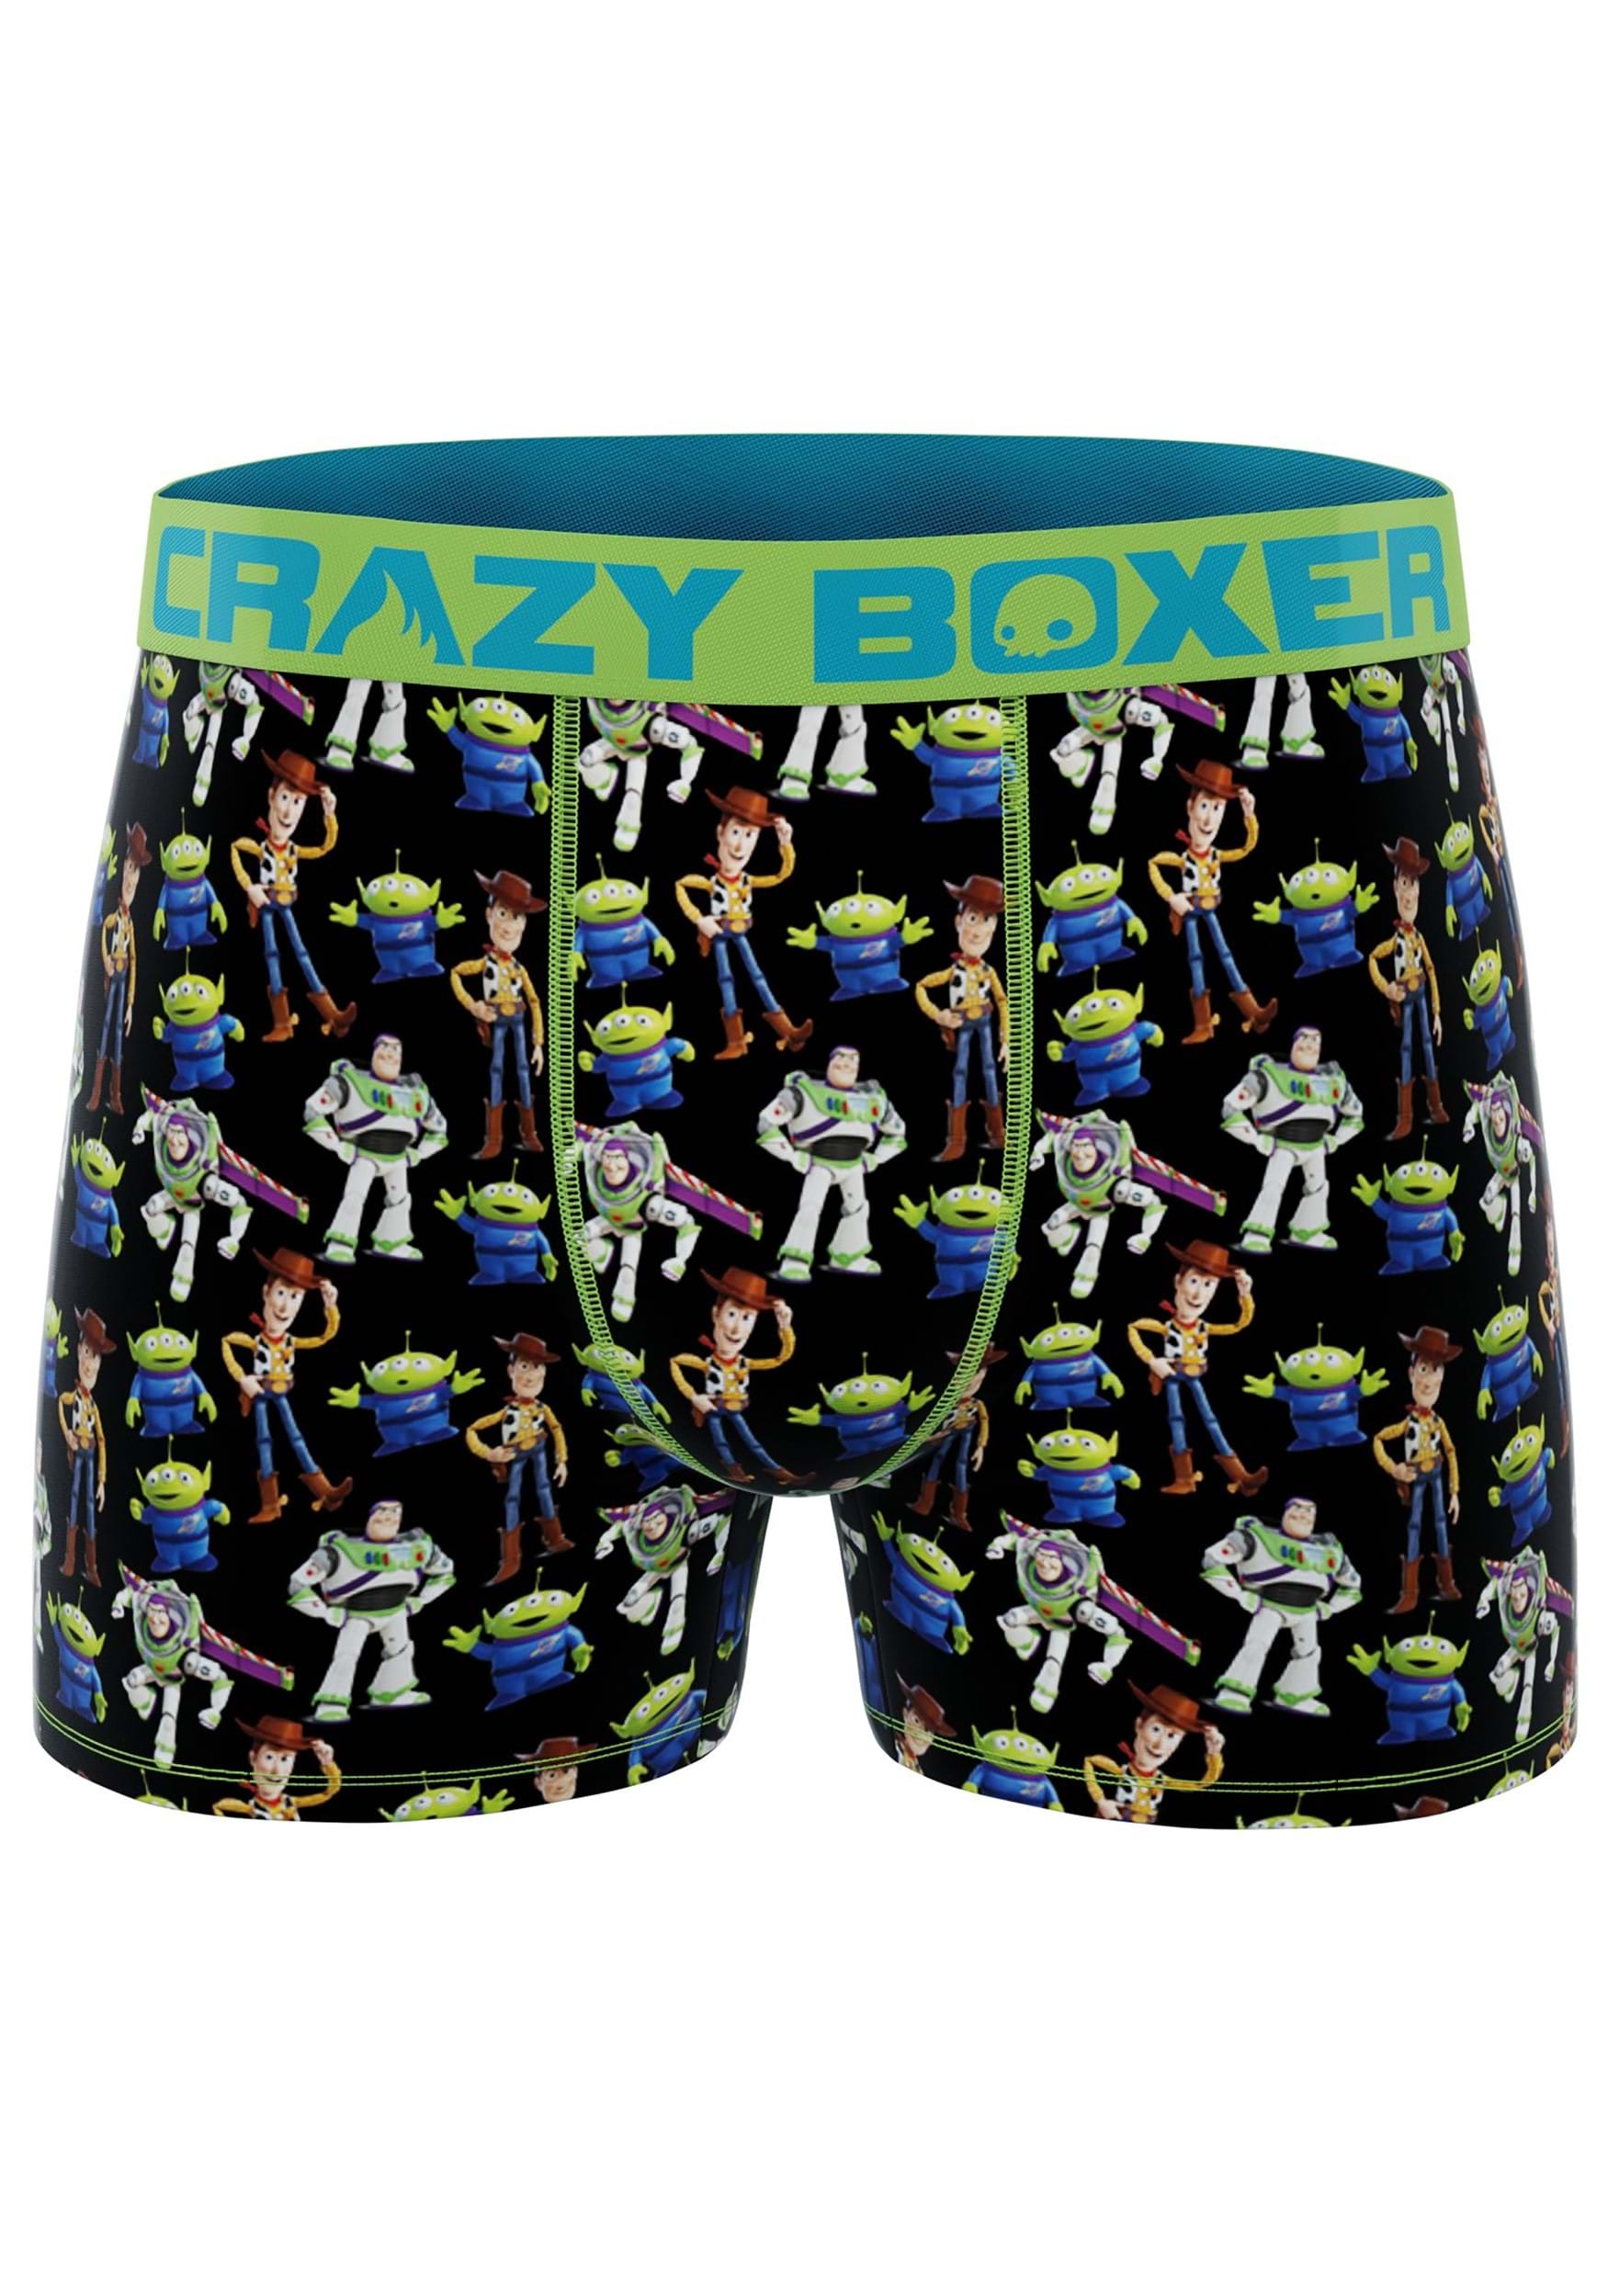 https://images.fun.co.uk/products/76366/1-1/crazy-boxers-mens-boxer-briefs-disney-toy-story.jpg